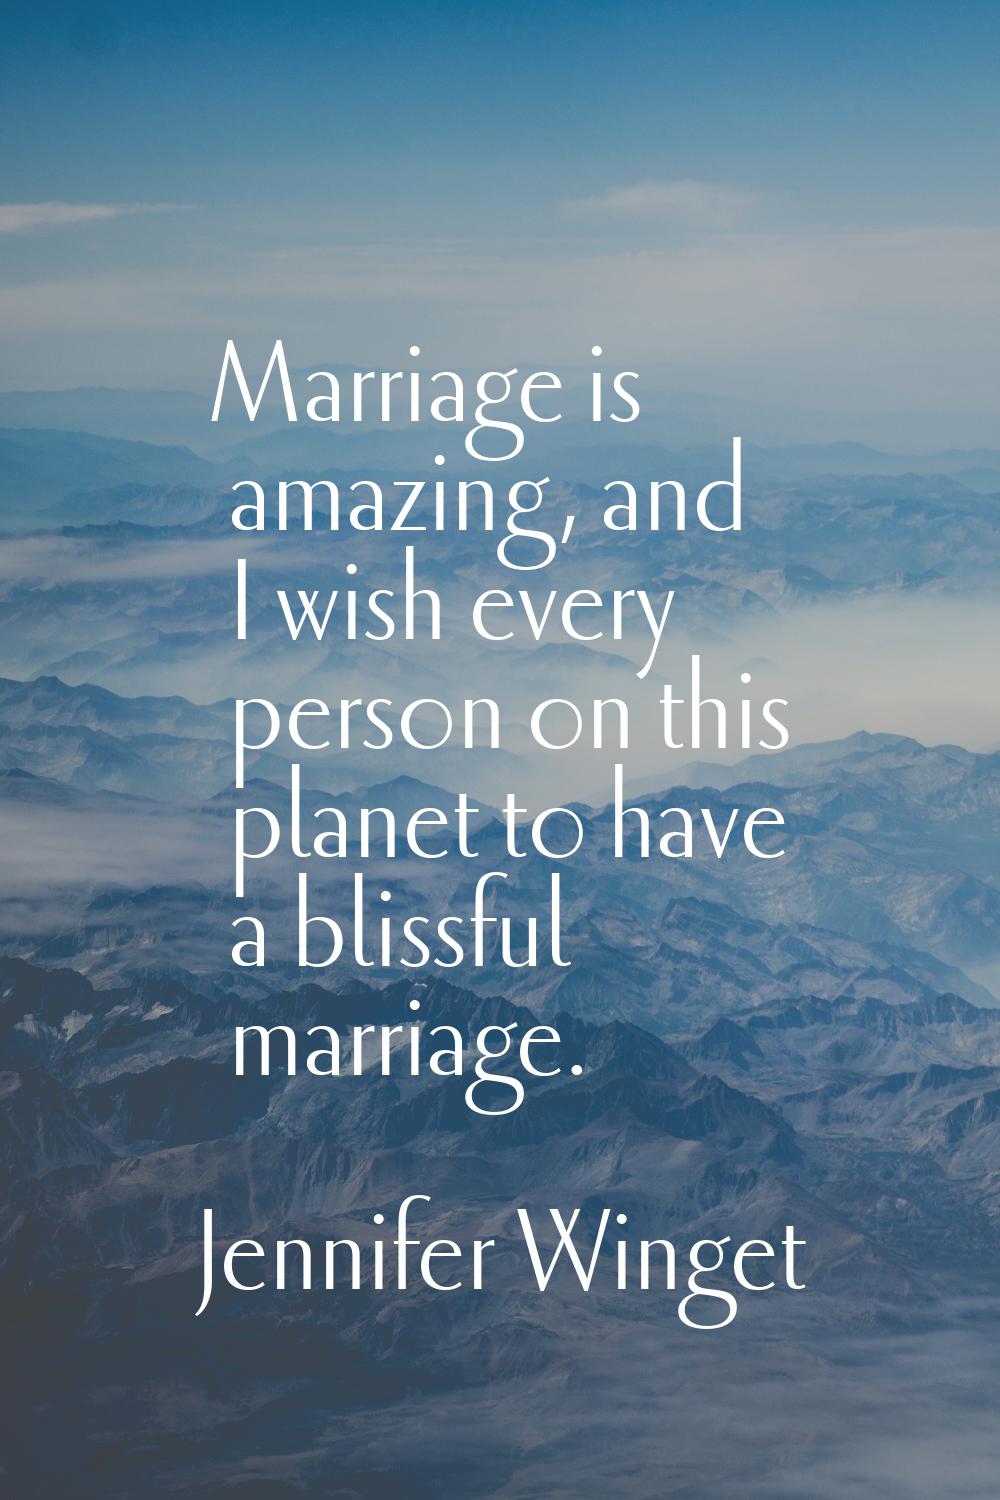 Marriage is amazing, and I wish every person on this planet to have a blissful marriage.